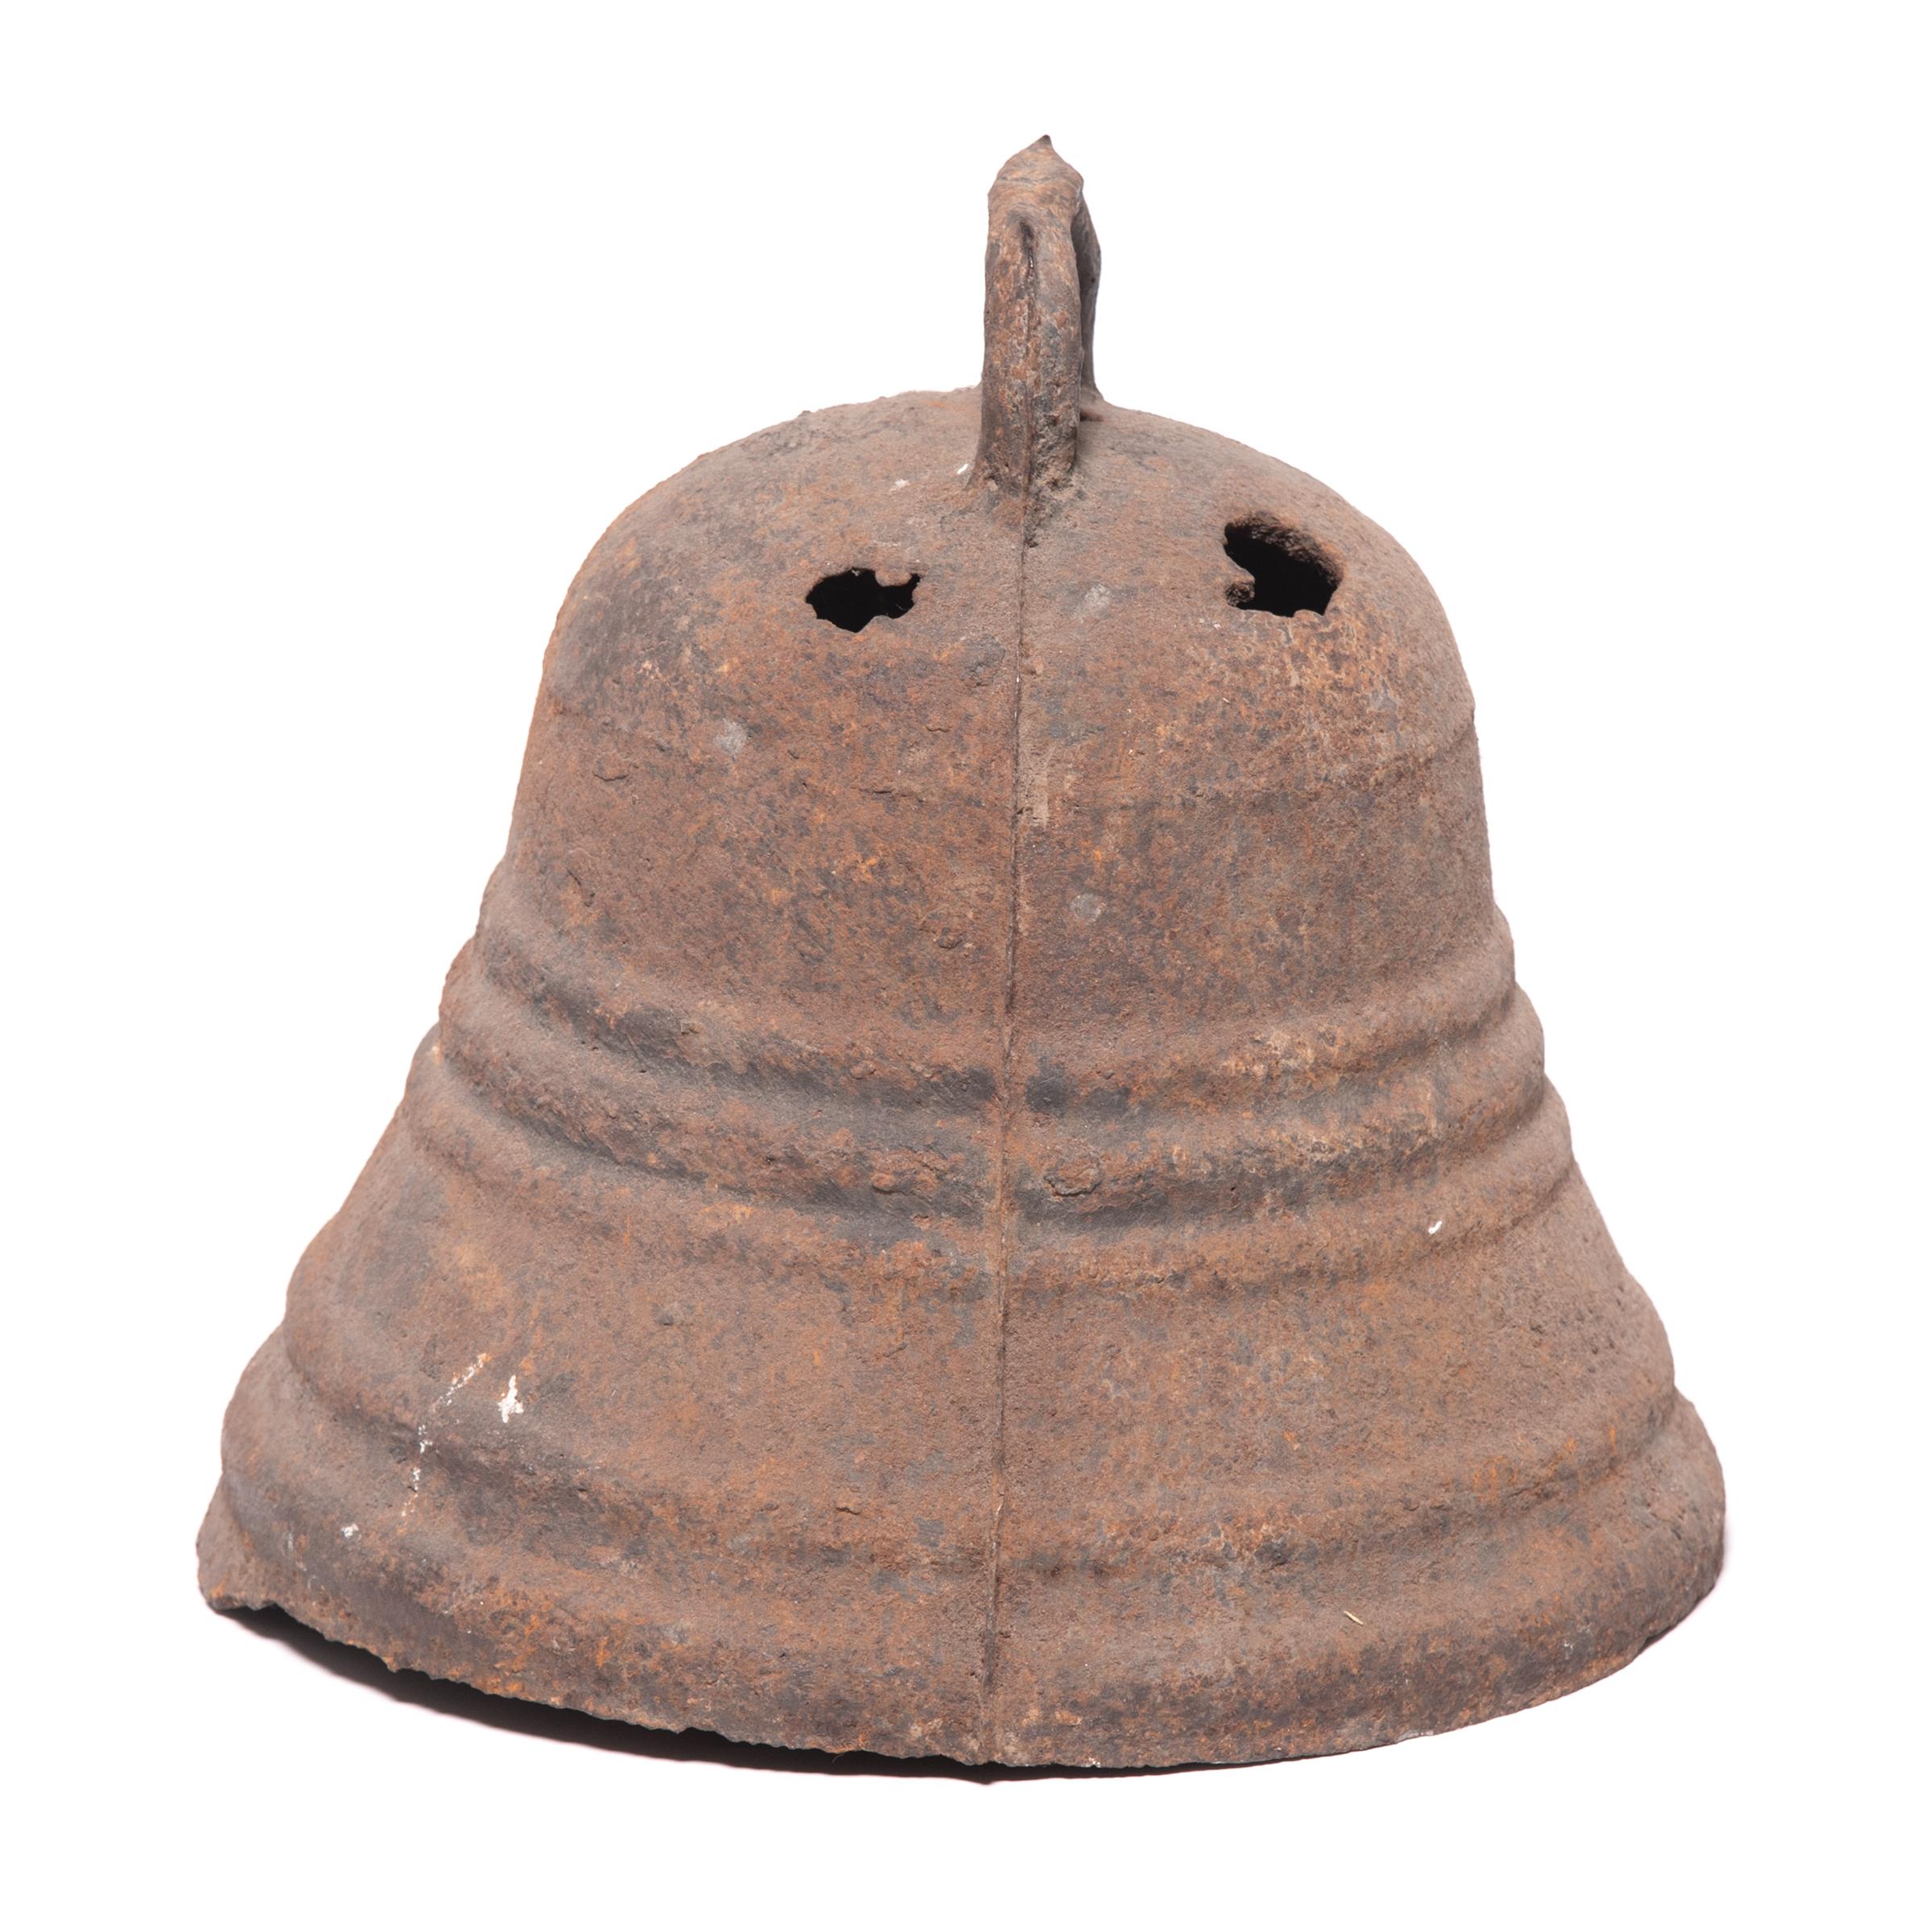 This rustic, 19th century iron bell once pealed in celebration or gave notice of important events in a town in northern China. The bell's wide mouth and ridged bead lines give this bell unique character, complemented by its fantastic textured